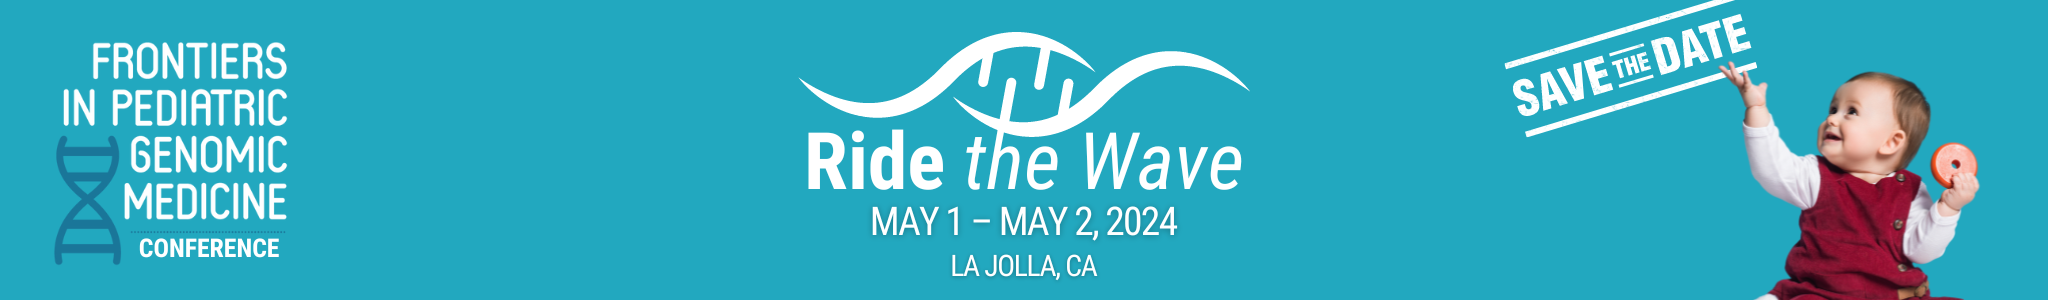 Frontiers in Pediatric Genomic Medicine - Save the Date - May 1 – May 2, 2024